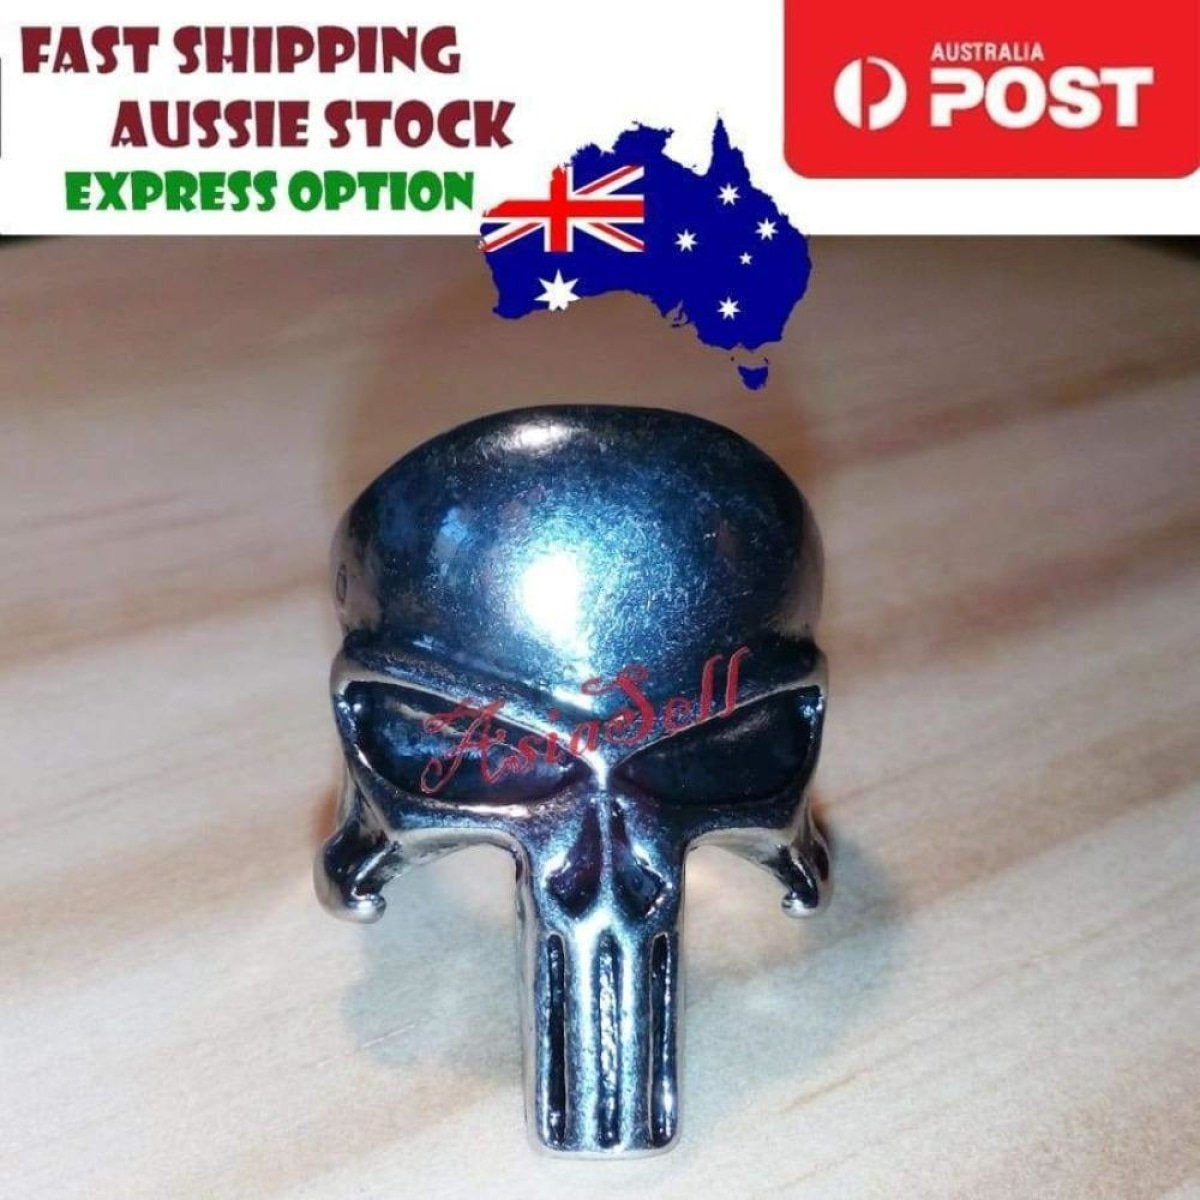 Stainless Steel Skull Ring Head Evil Ring Rings Black Silver Gold Silver Biker | Asia Sell  -  Type 1 Size 10 U.S. 62mm